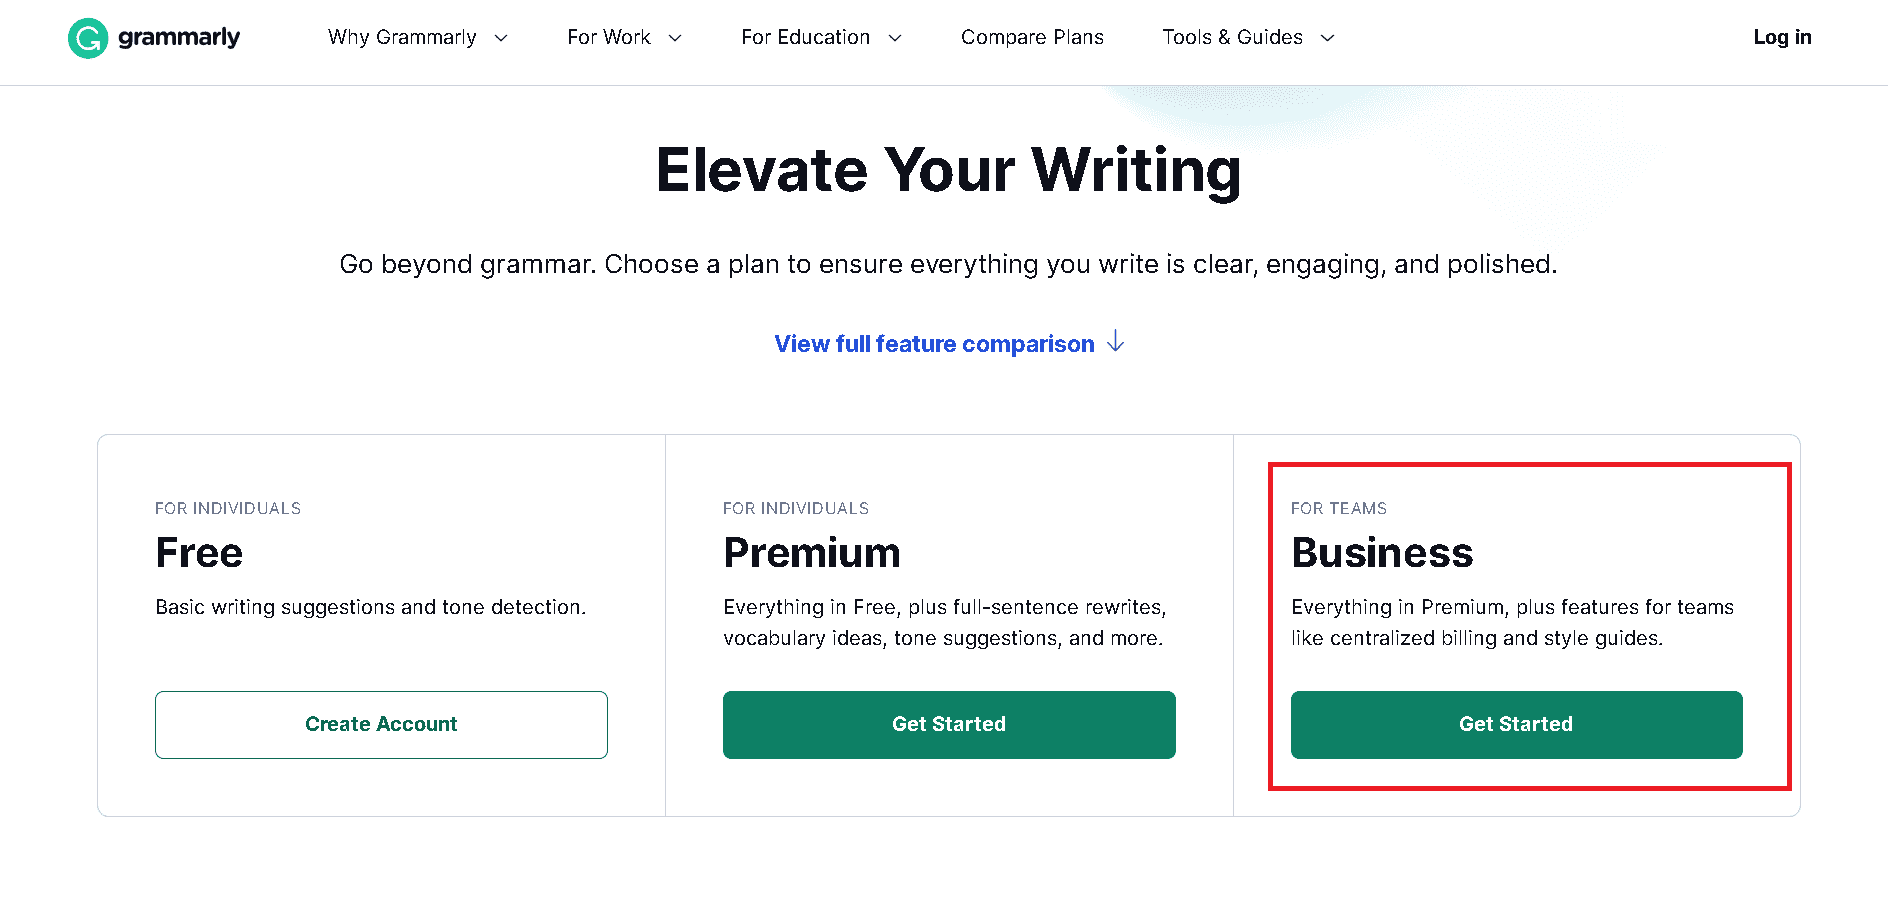 Pick Grammarly Business plan to activate 7-day free trial